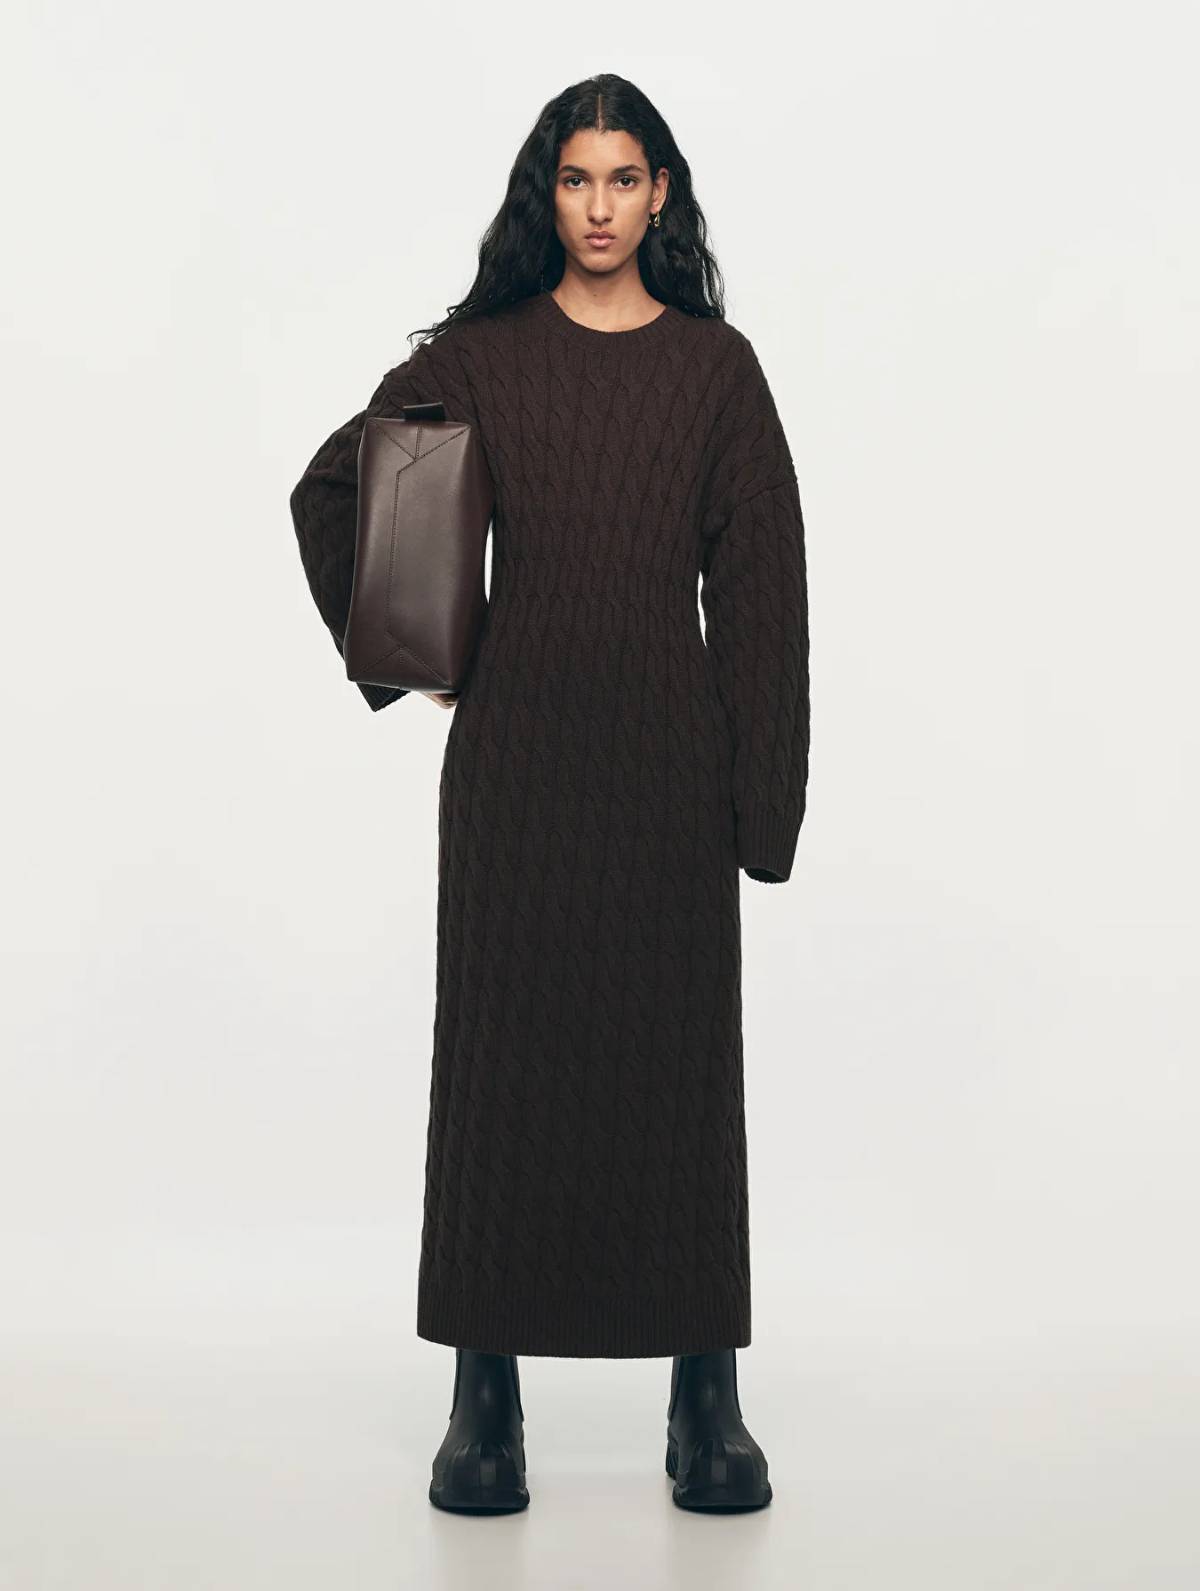 Cable-Knit Wool Dress, adidas adiFOM Superstar Boots